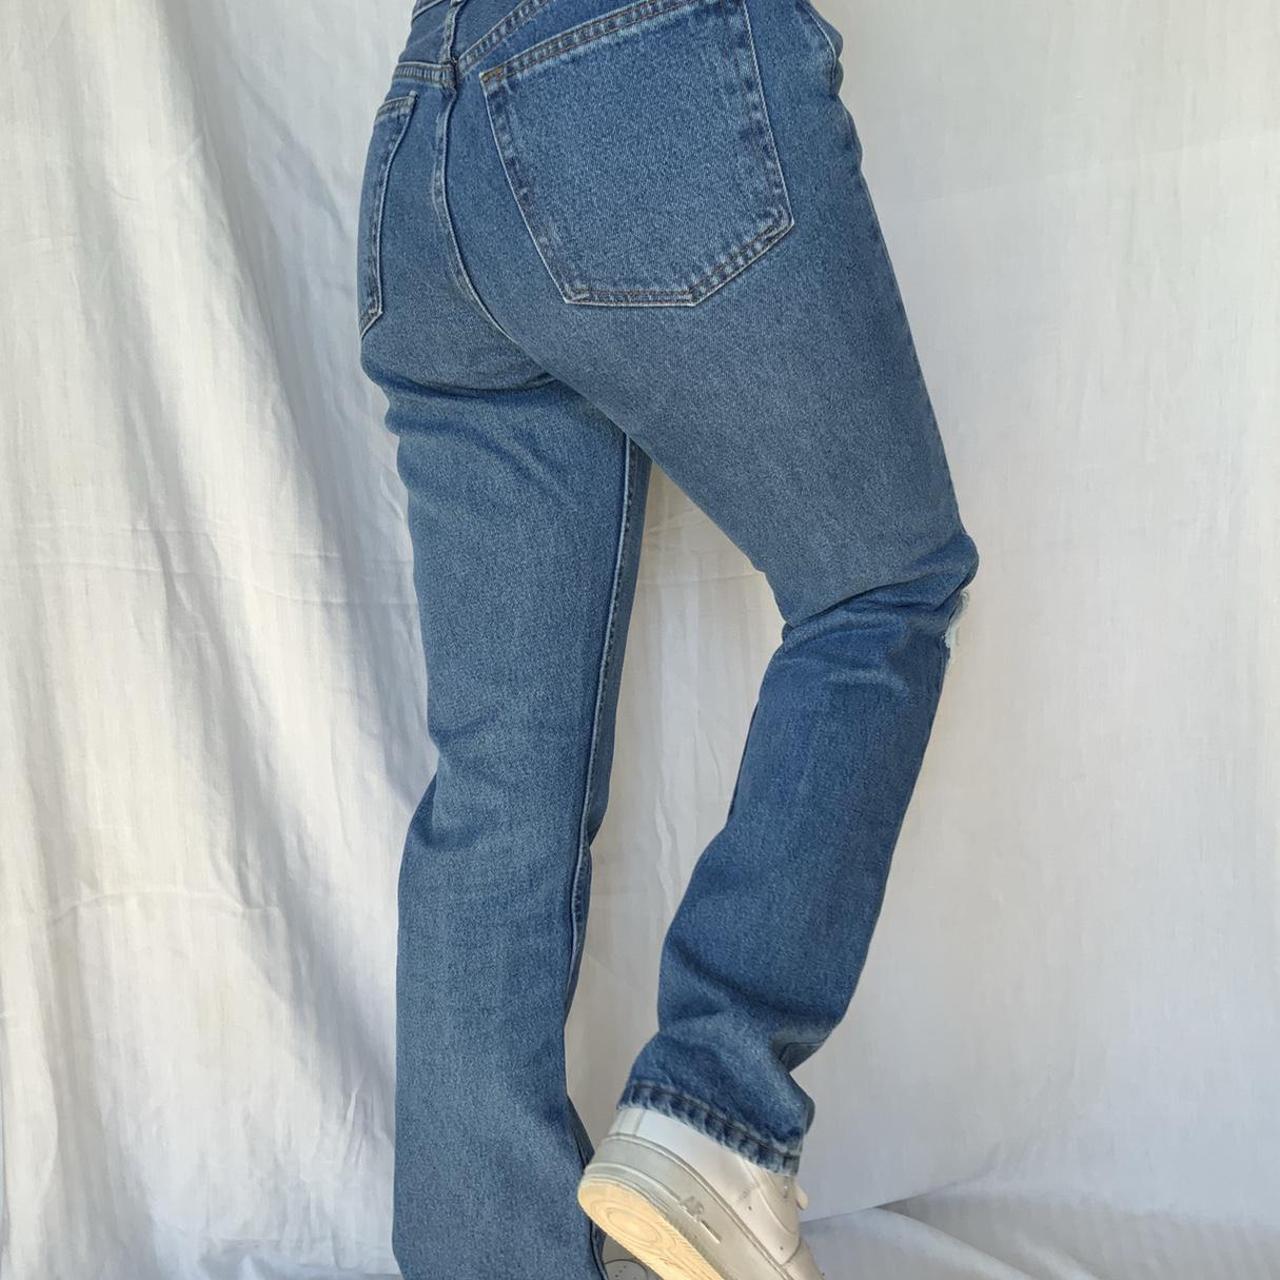 Women's Blue and Navy Jeans (2)